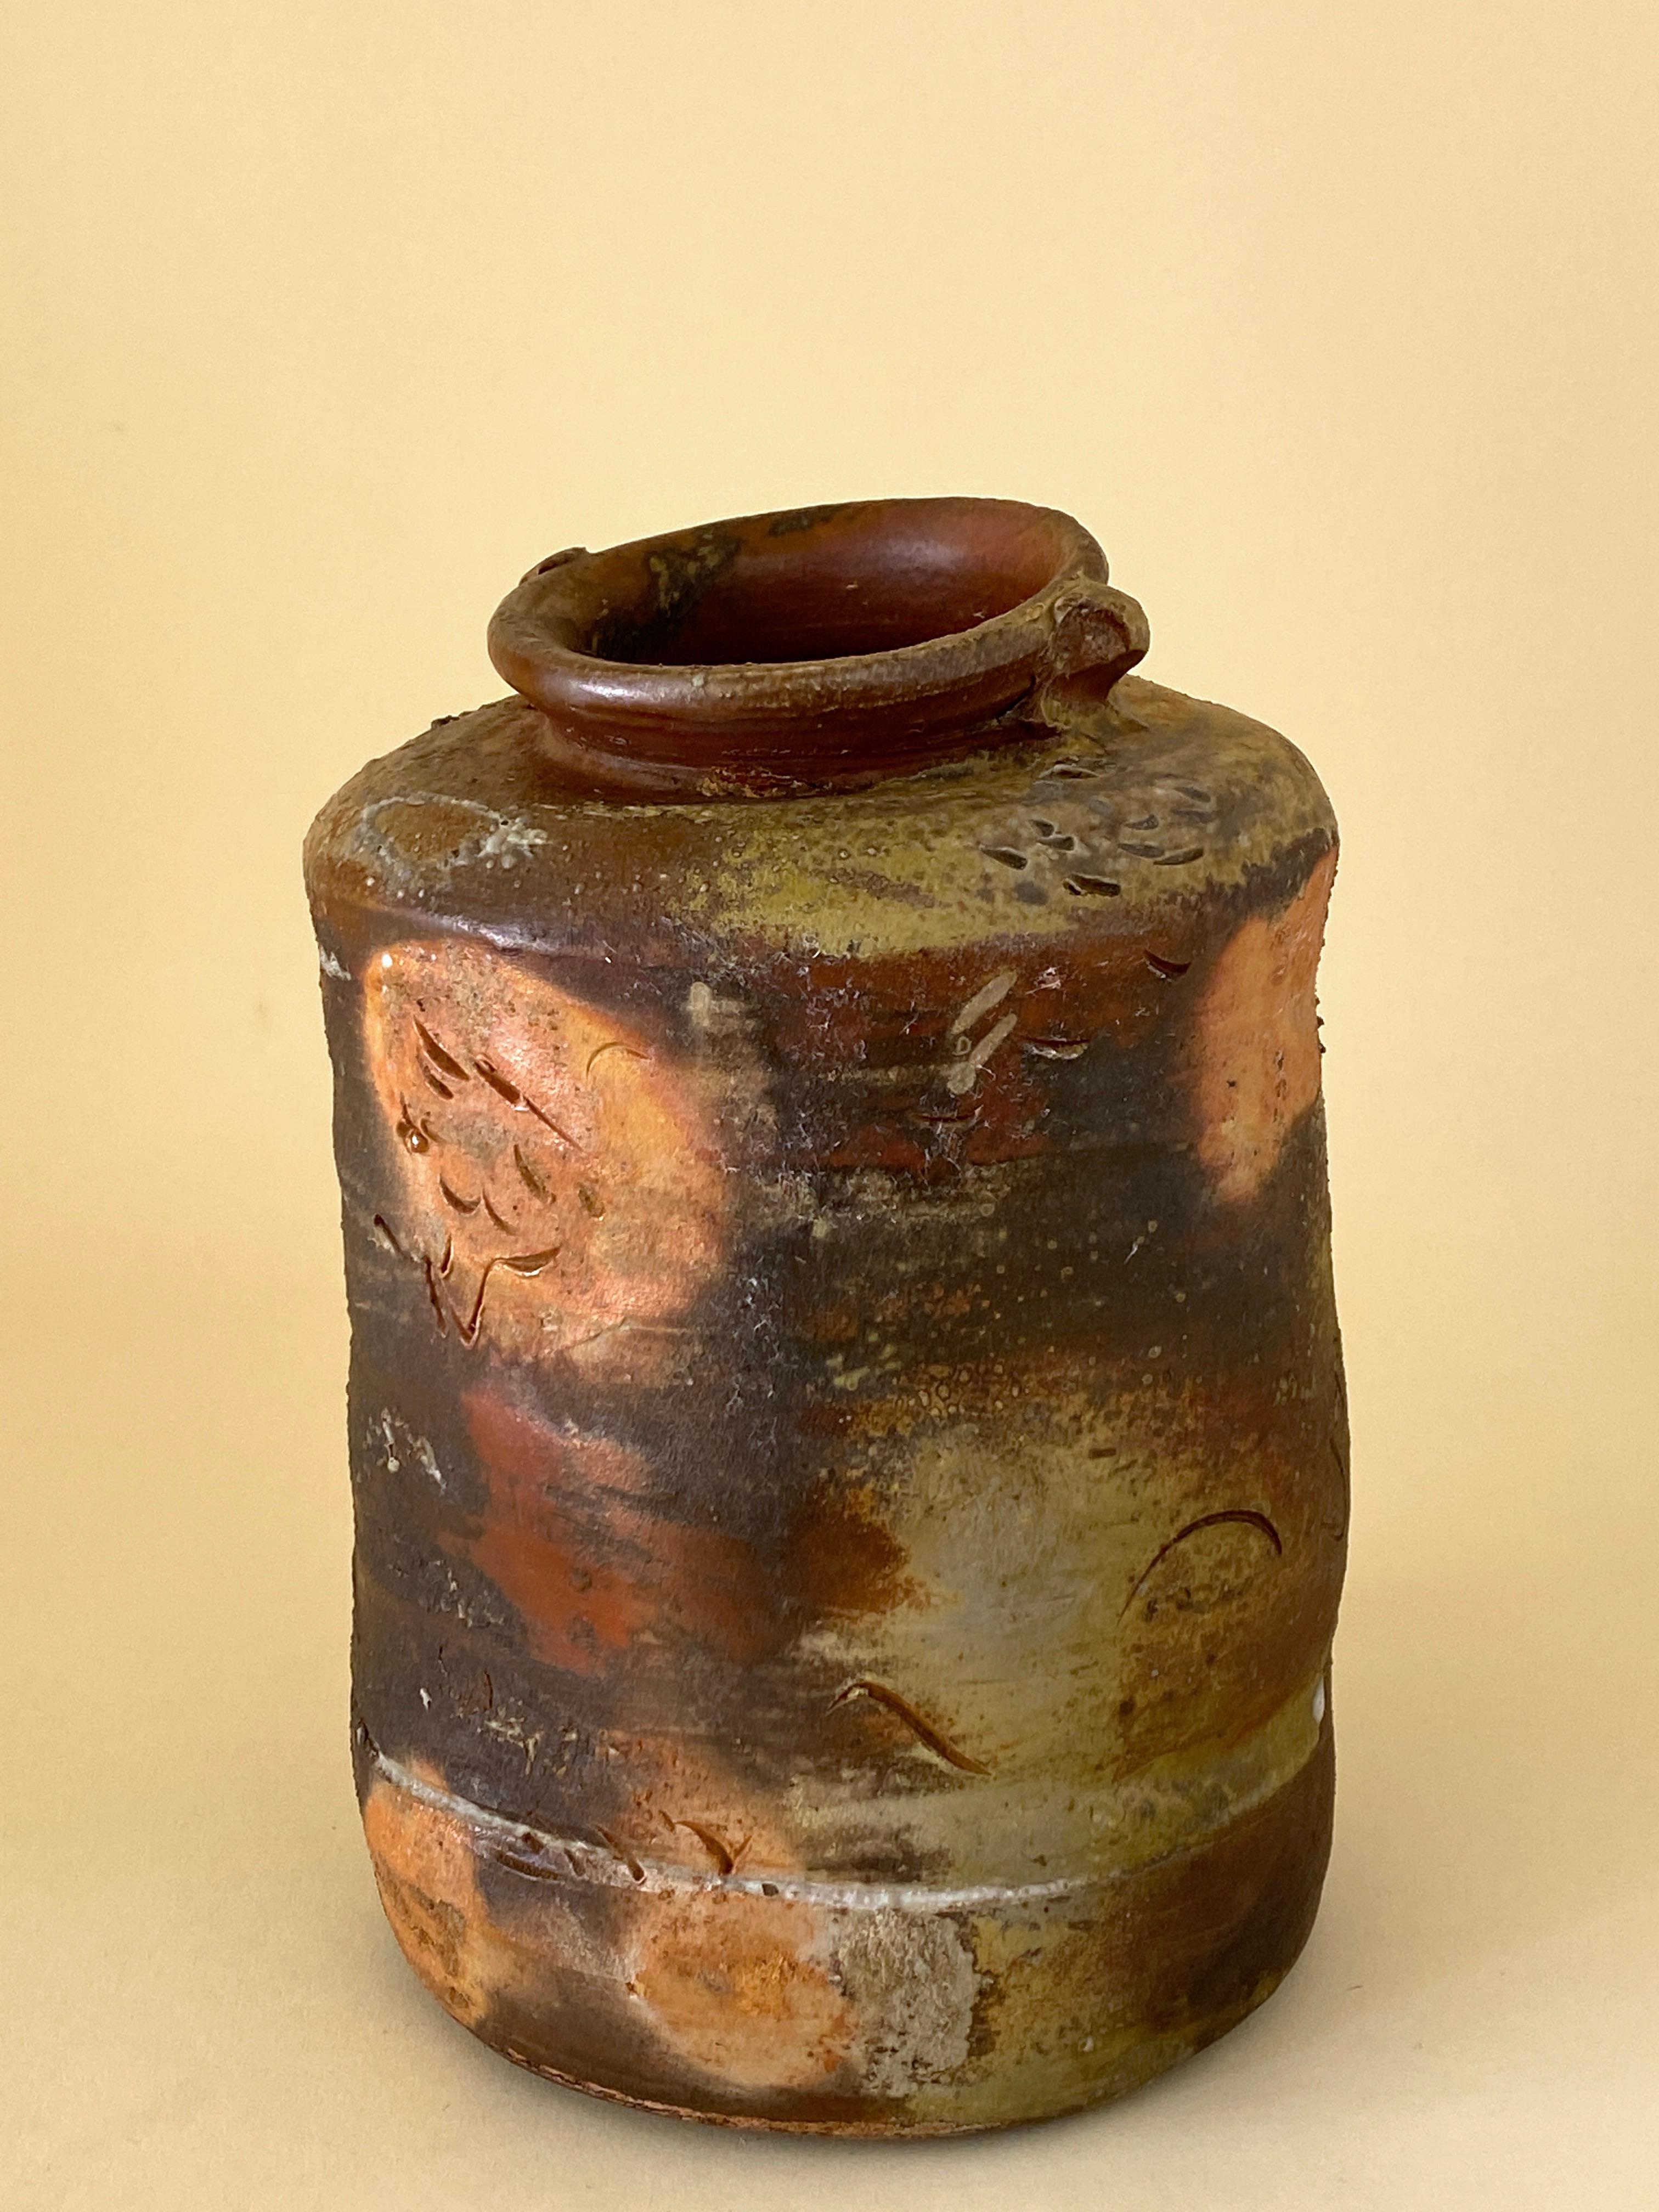 This gorgeous, noble ceramic jar was fired in a wood kiln and displays marks of all five elements in its creation - earth and water before firing, air and fire in the wood kiln, and metal where the minerals in the wood ash have hardened to a hard